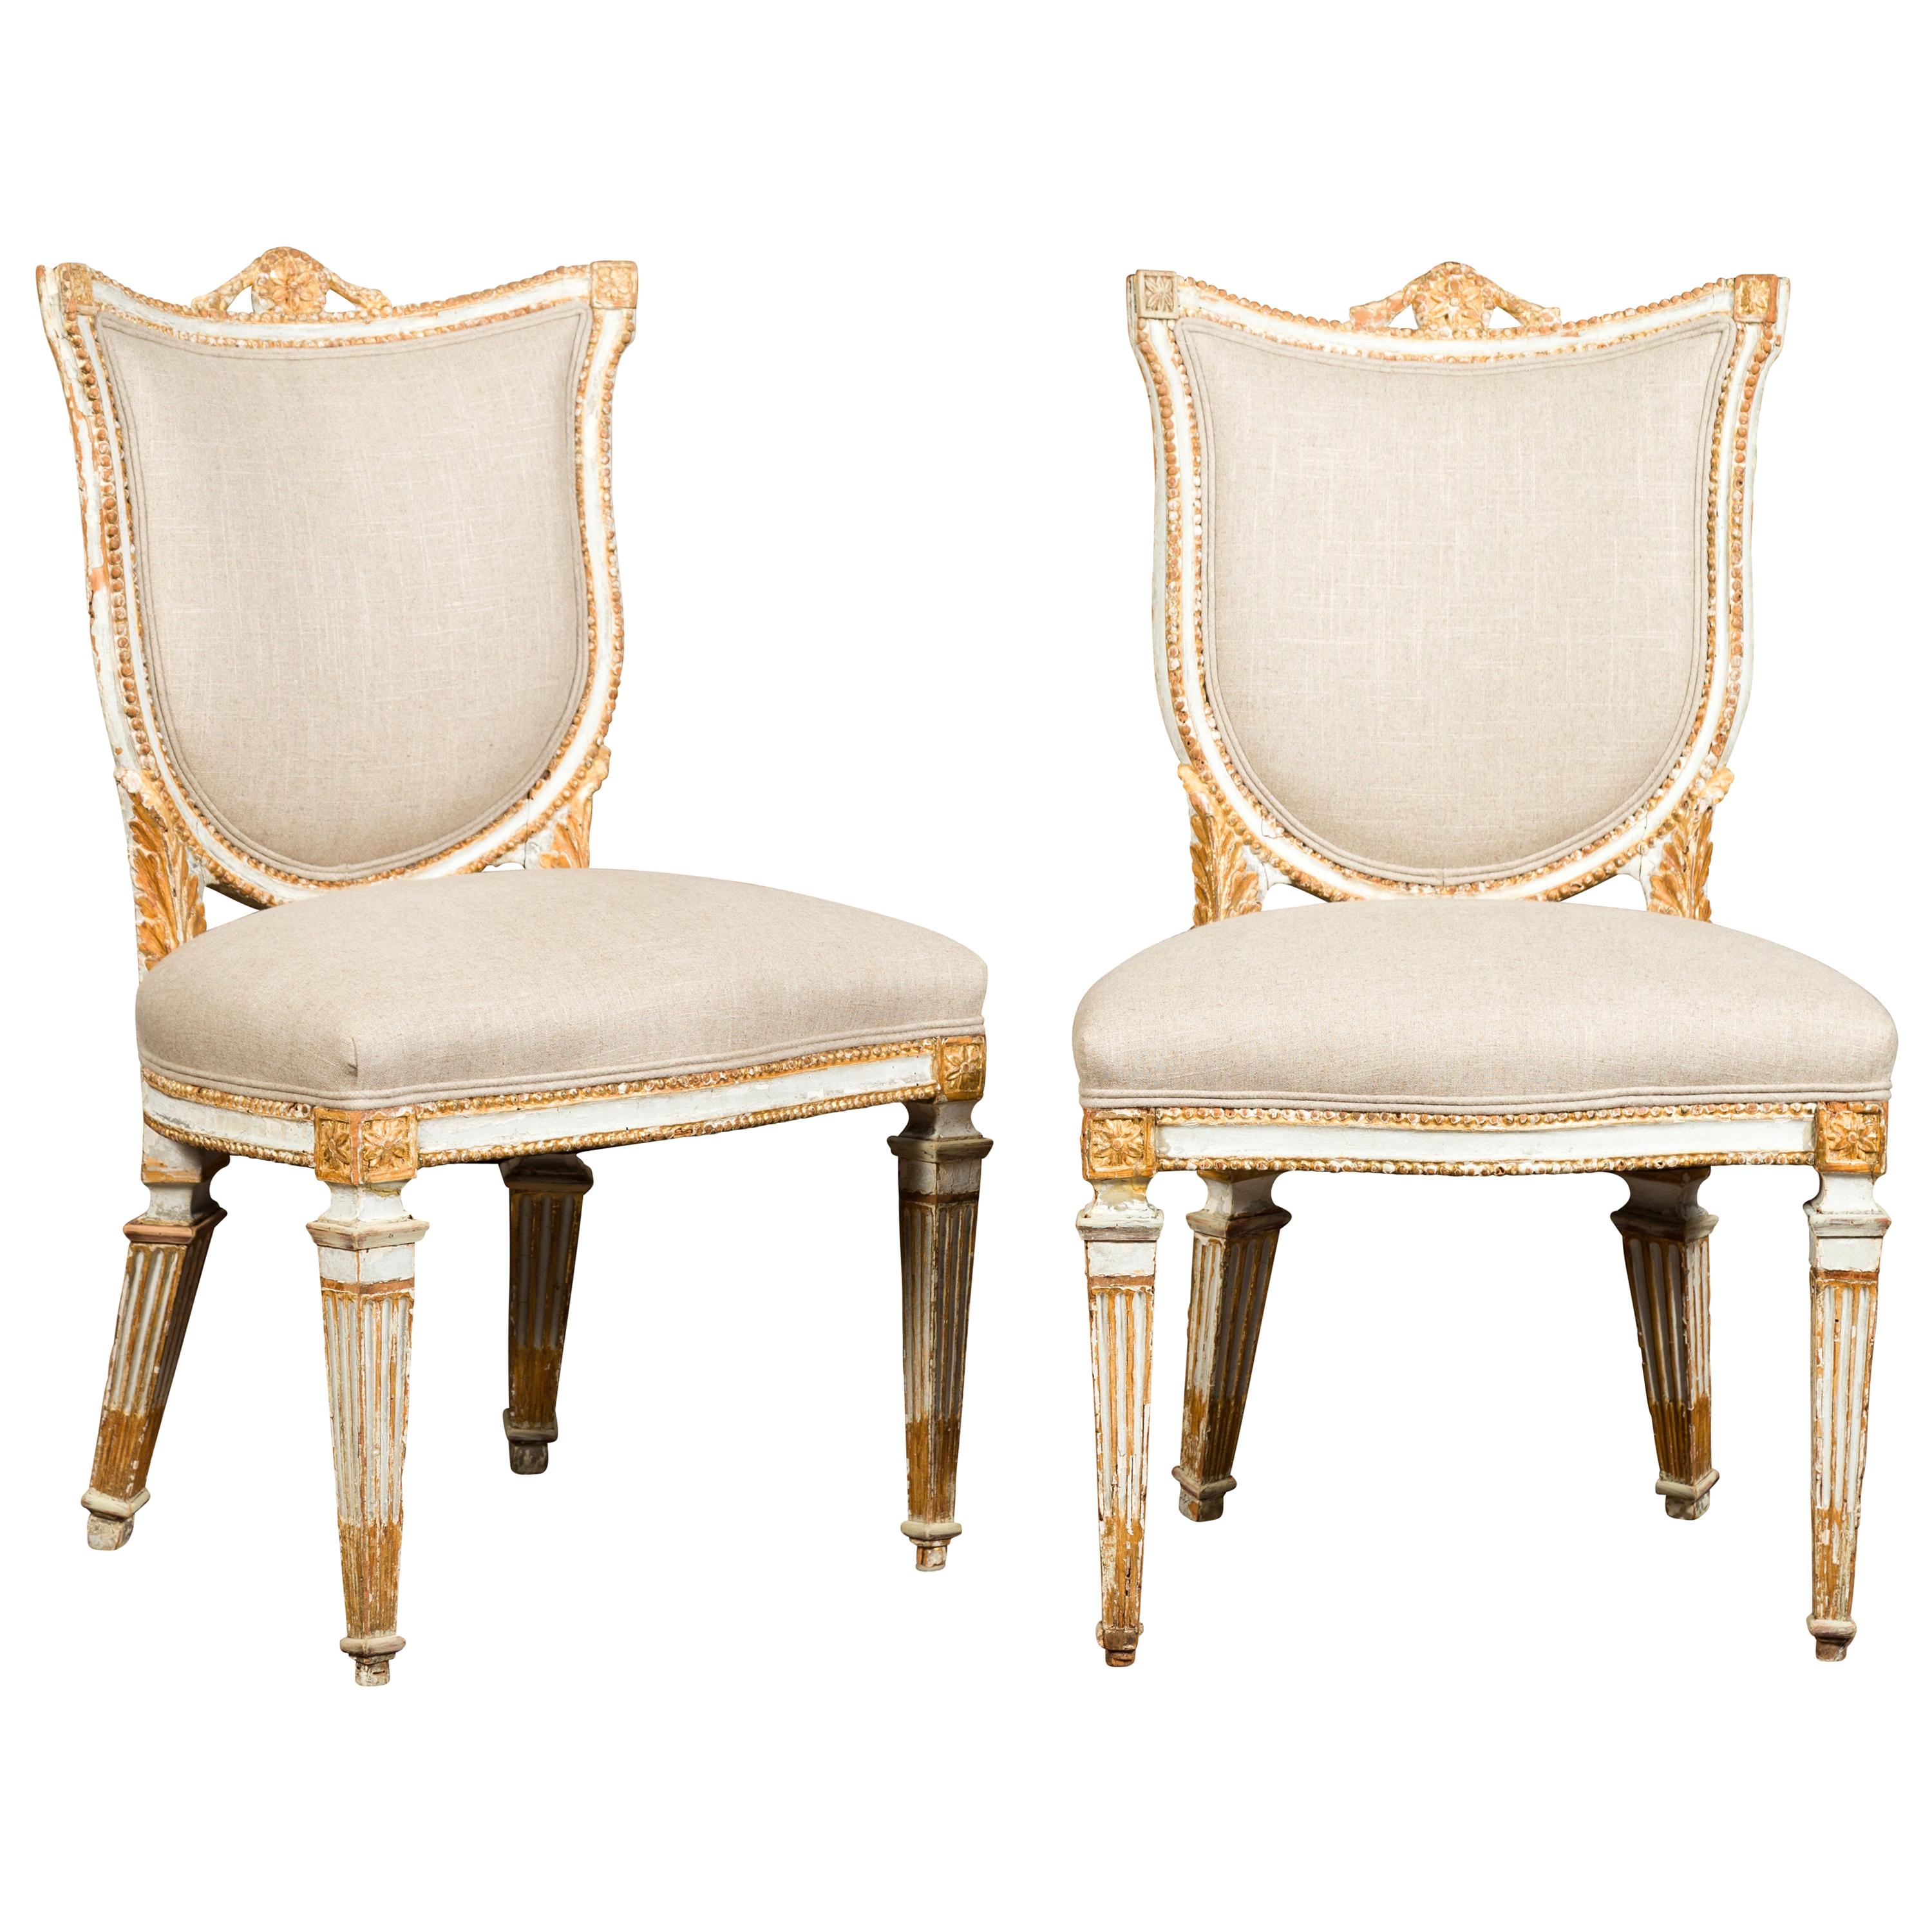 Pair of Italian Neoclassical Painted and Carved Side Chairs with Shield Backs